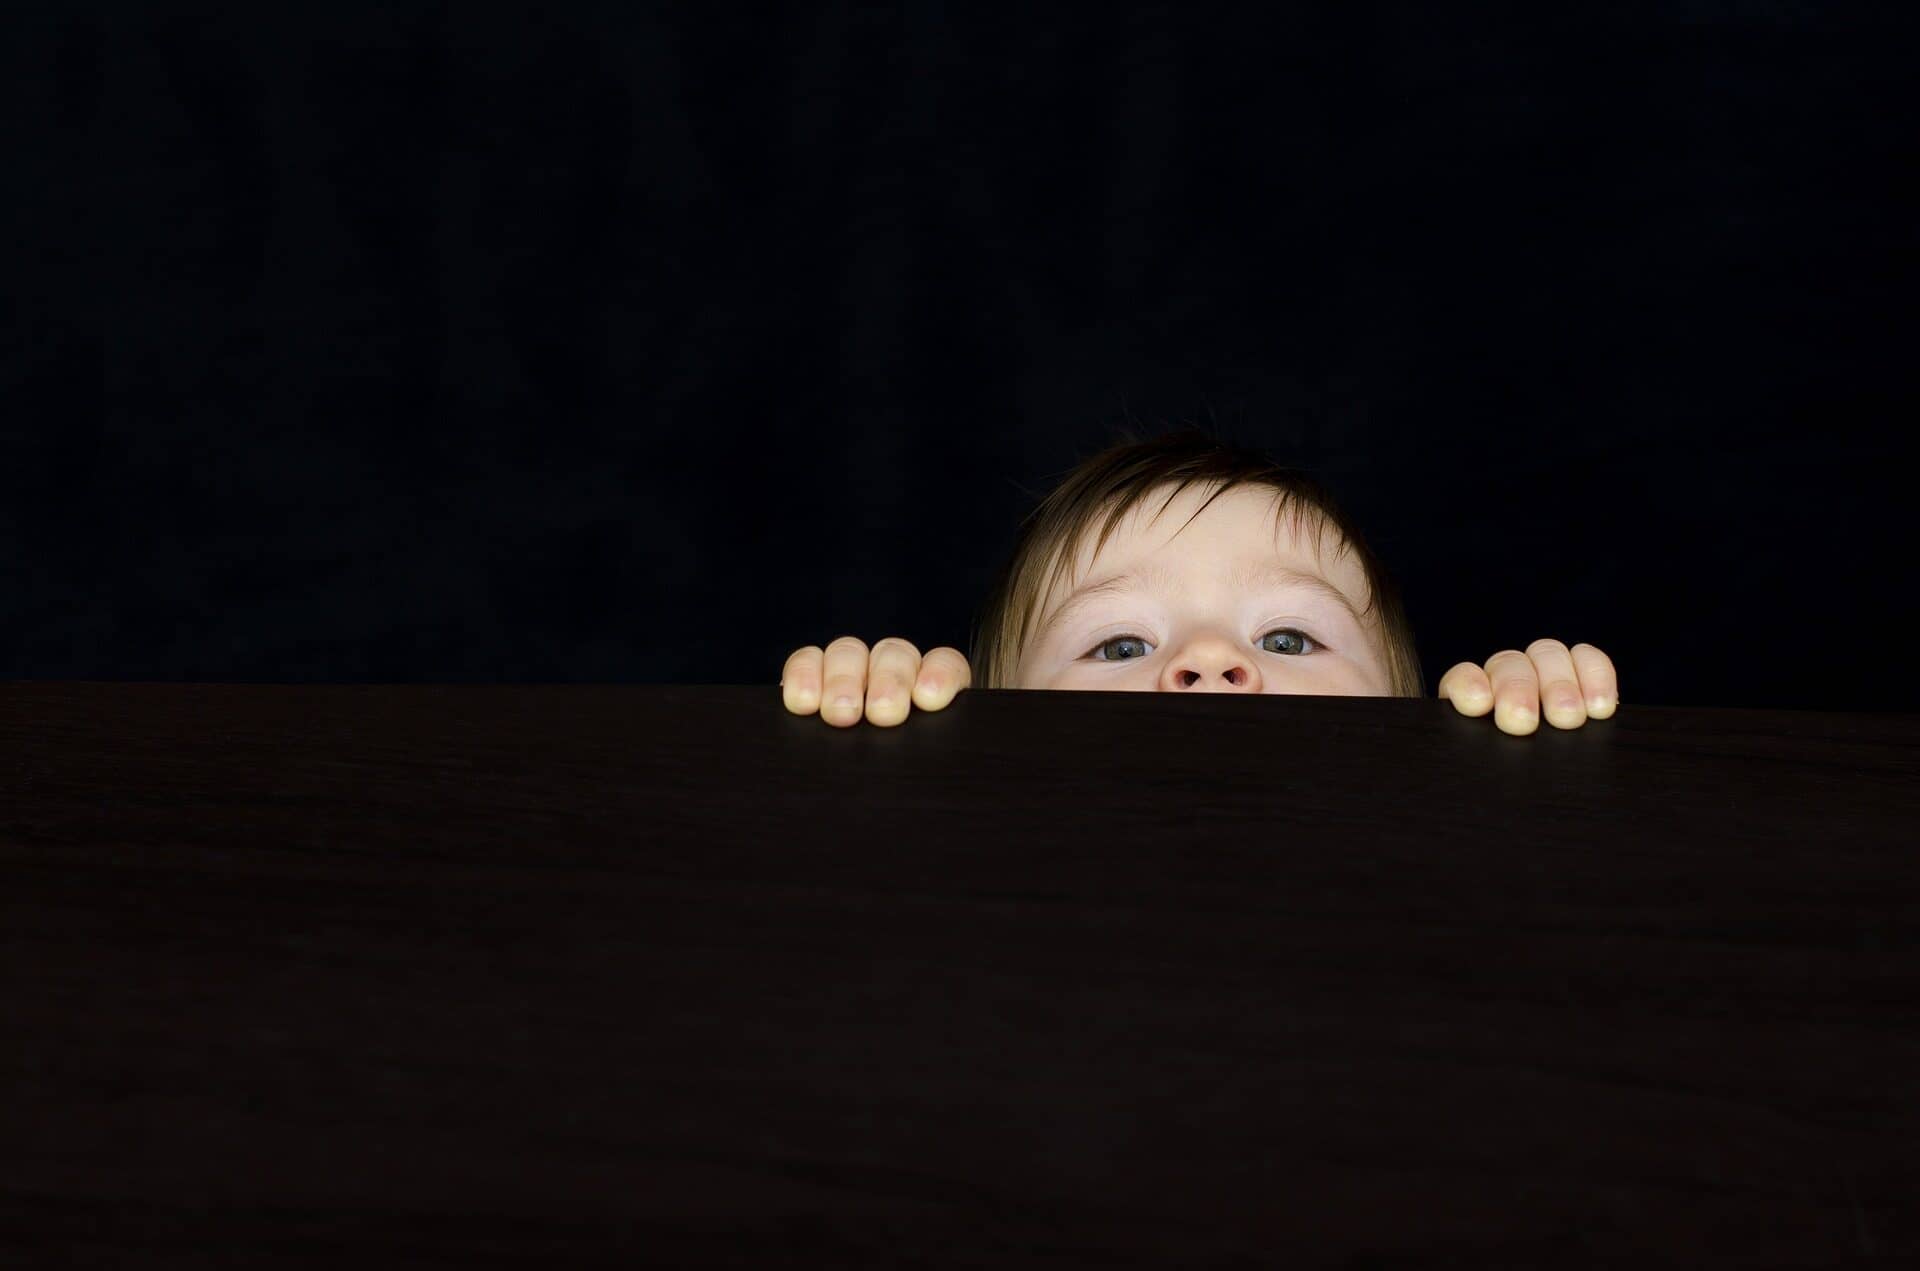 Image: A little boy peeking over a black wall, only eyes, nose and hands showing.